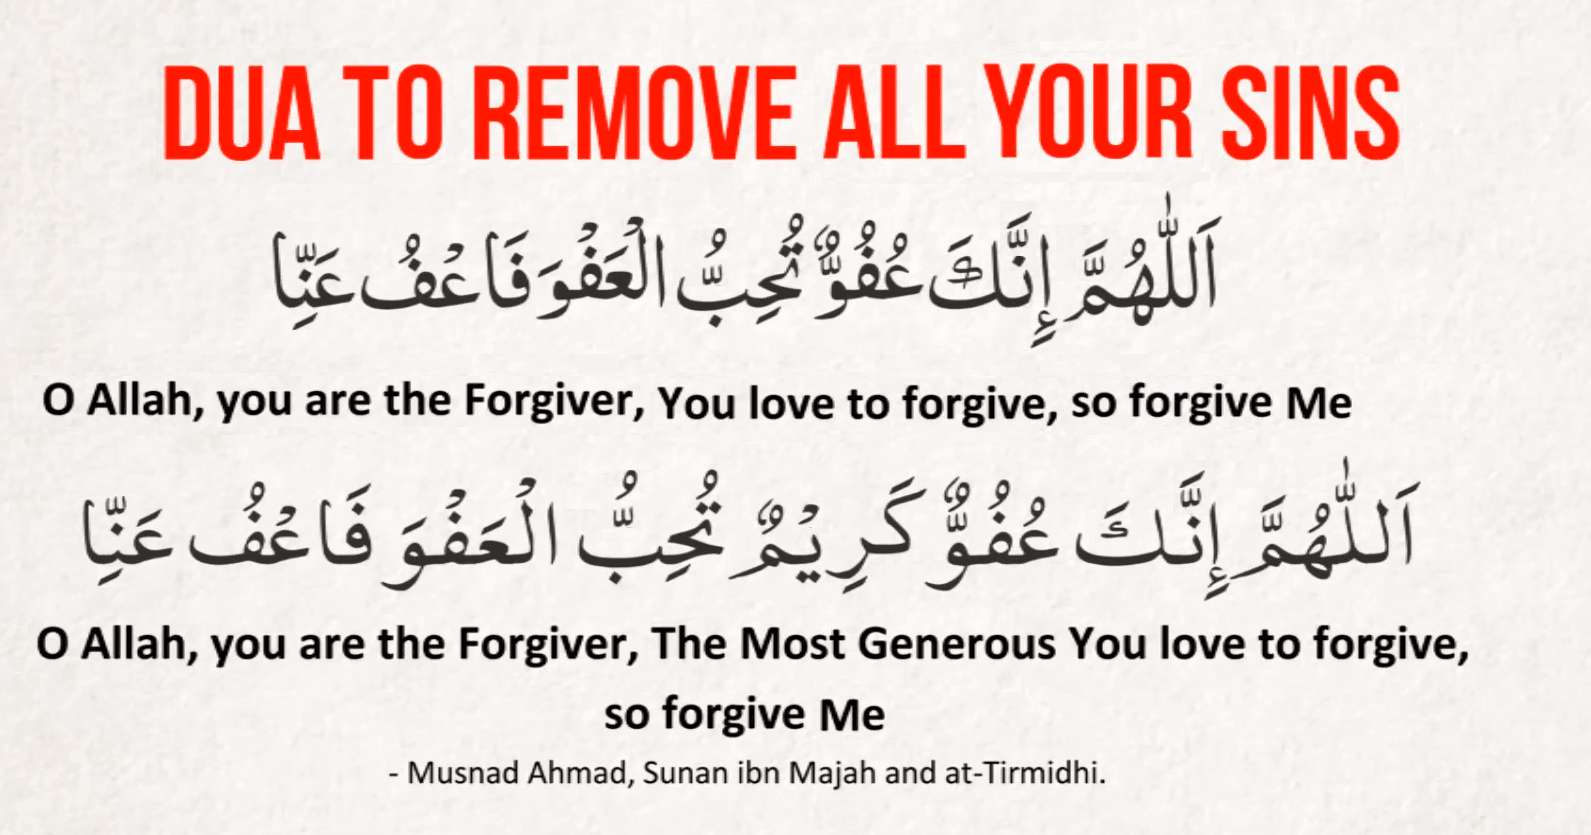 Dua To Remove All Your Sins 1 - Ramadan Reminders - Dua To Remove All Your Past Sins